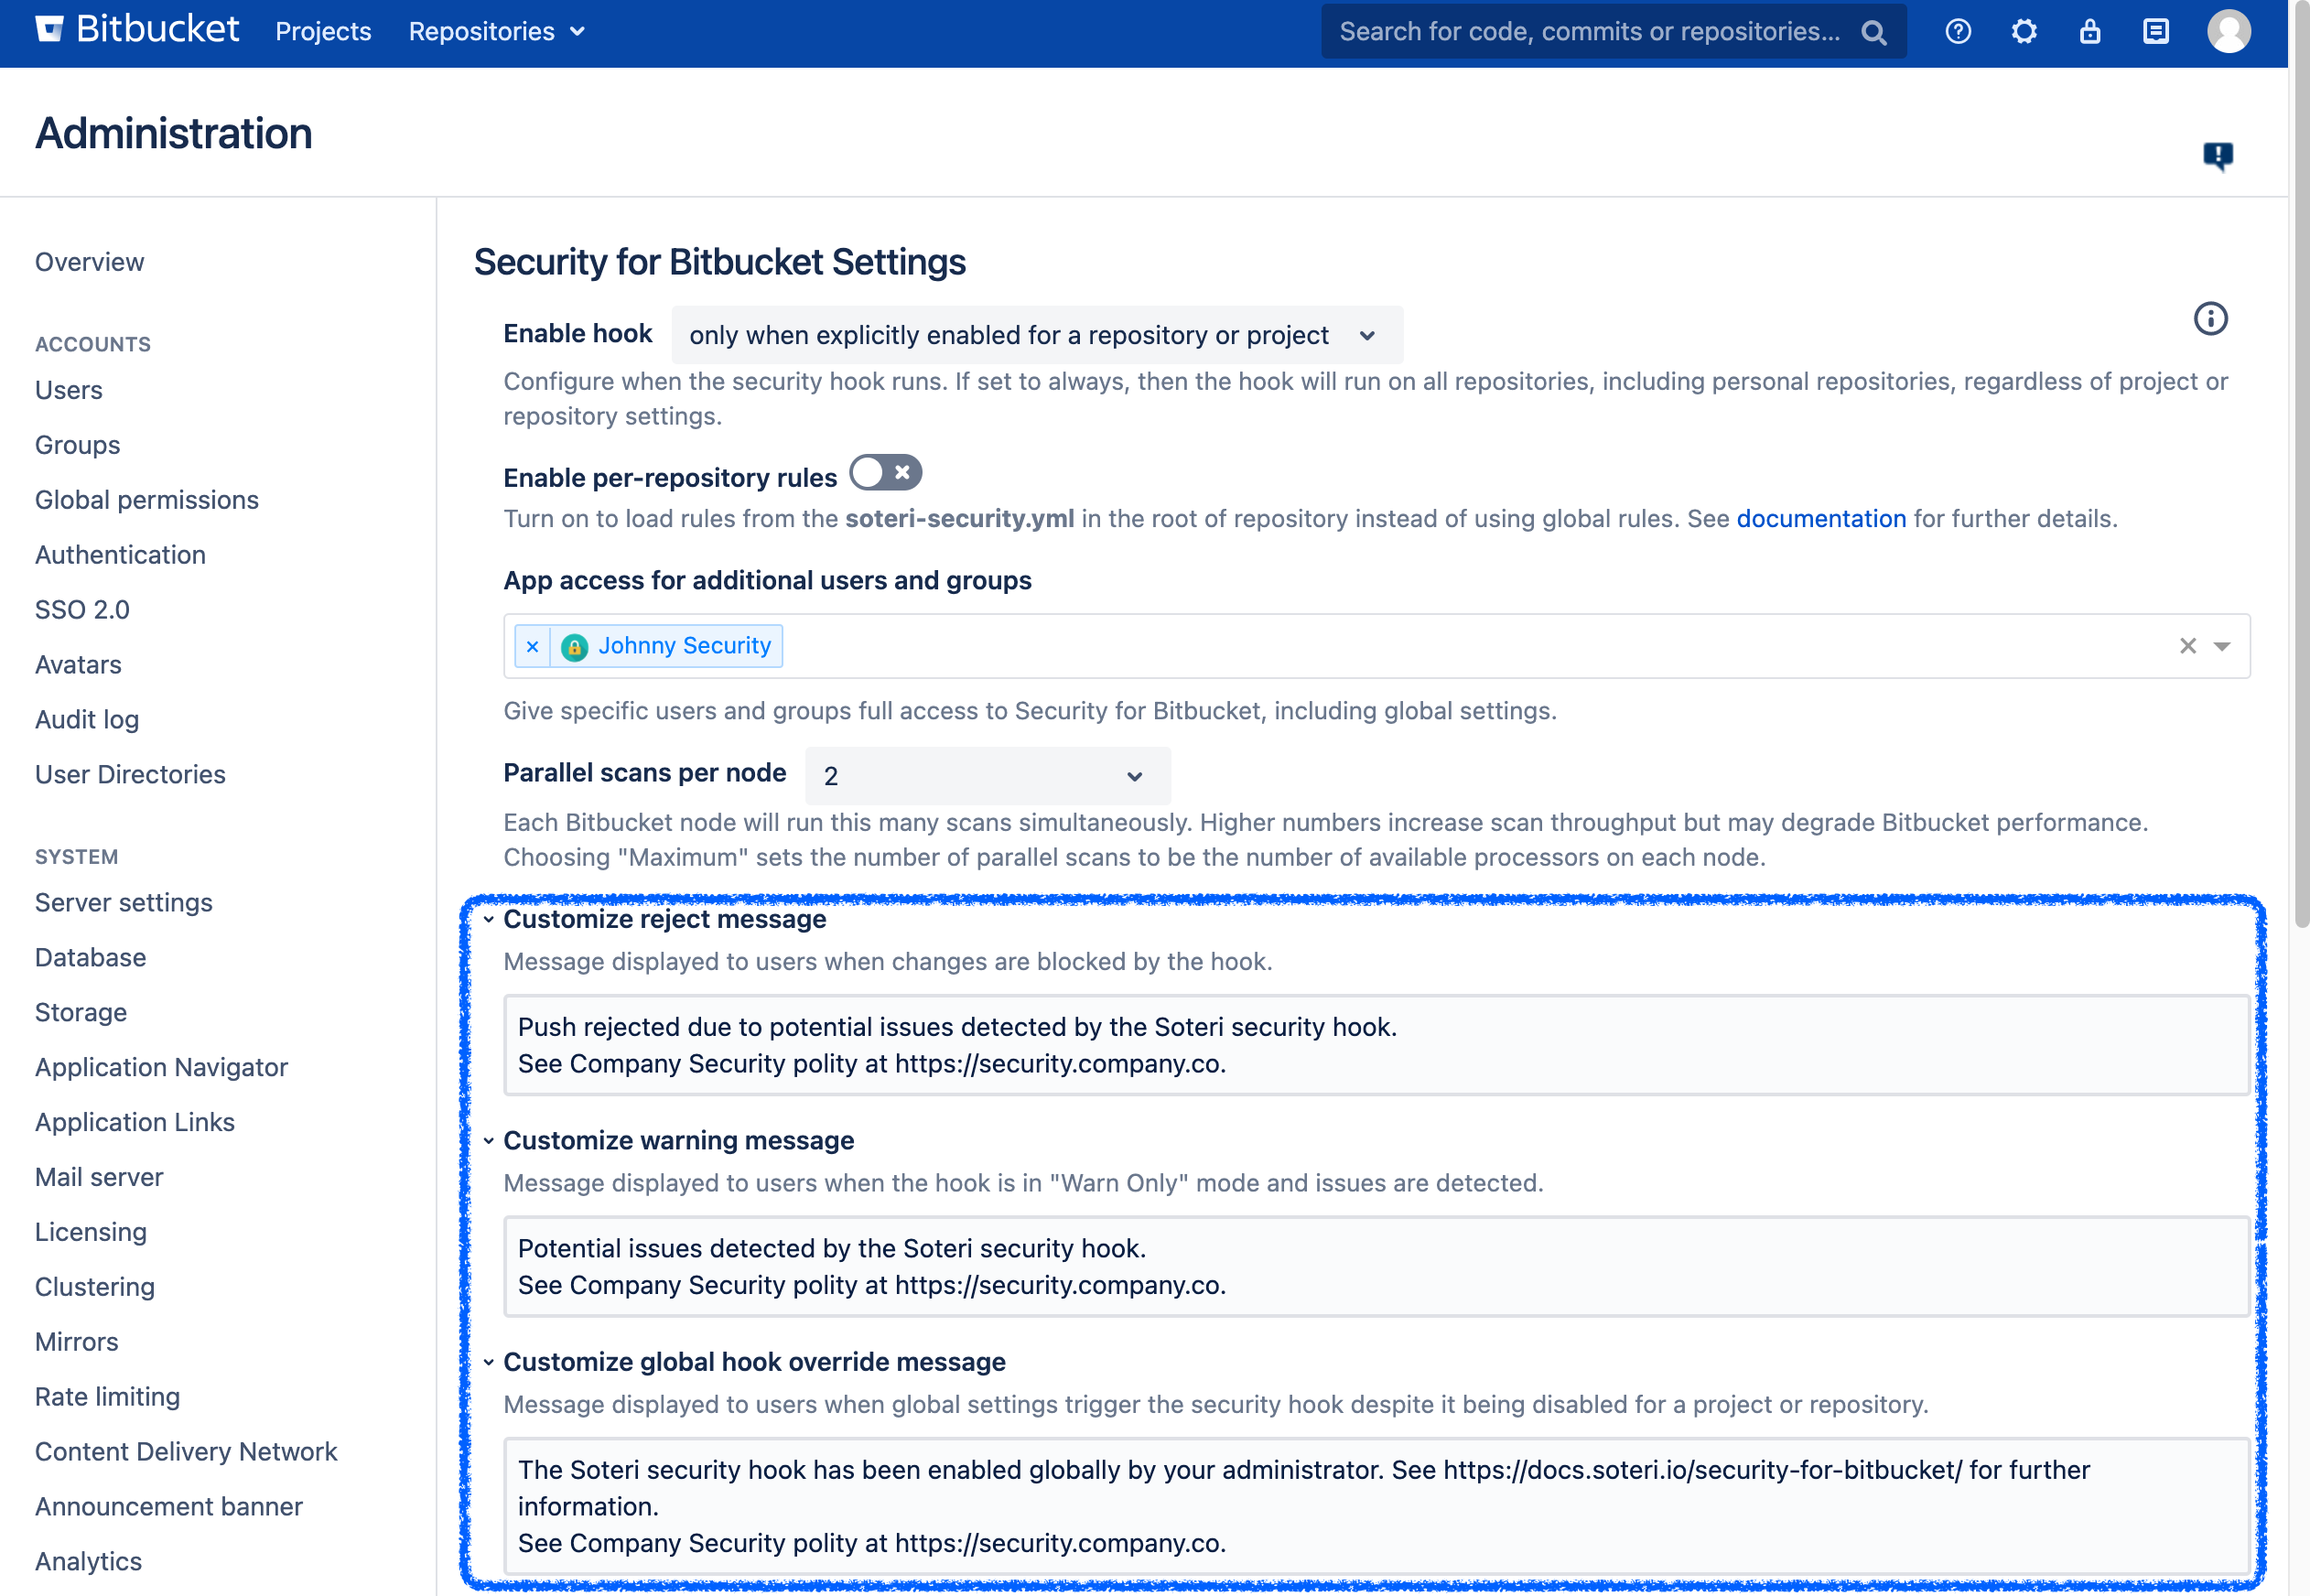 Customizable messages in the Security for Bitbucket settings.